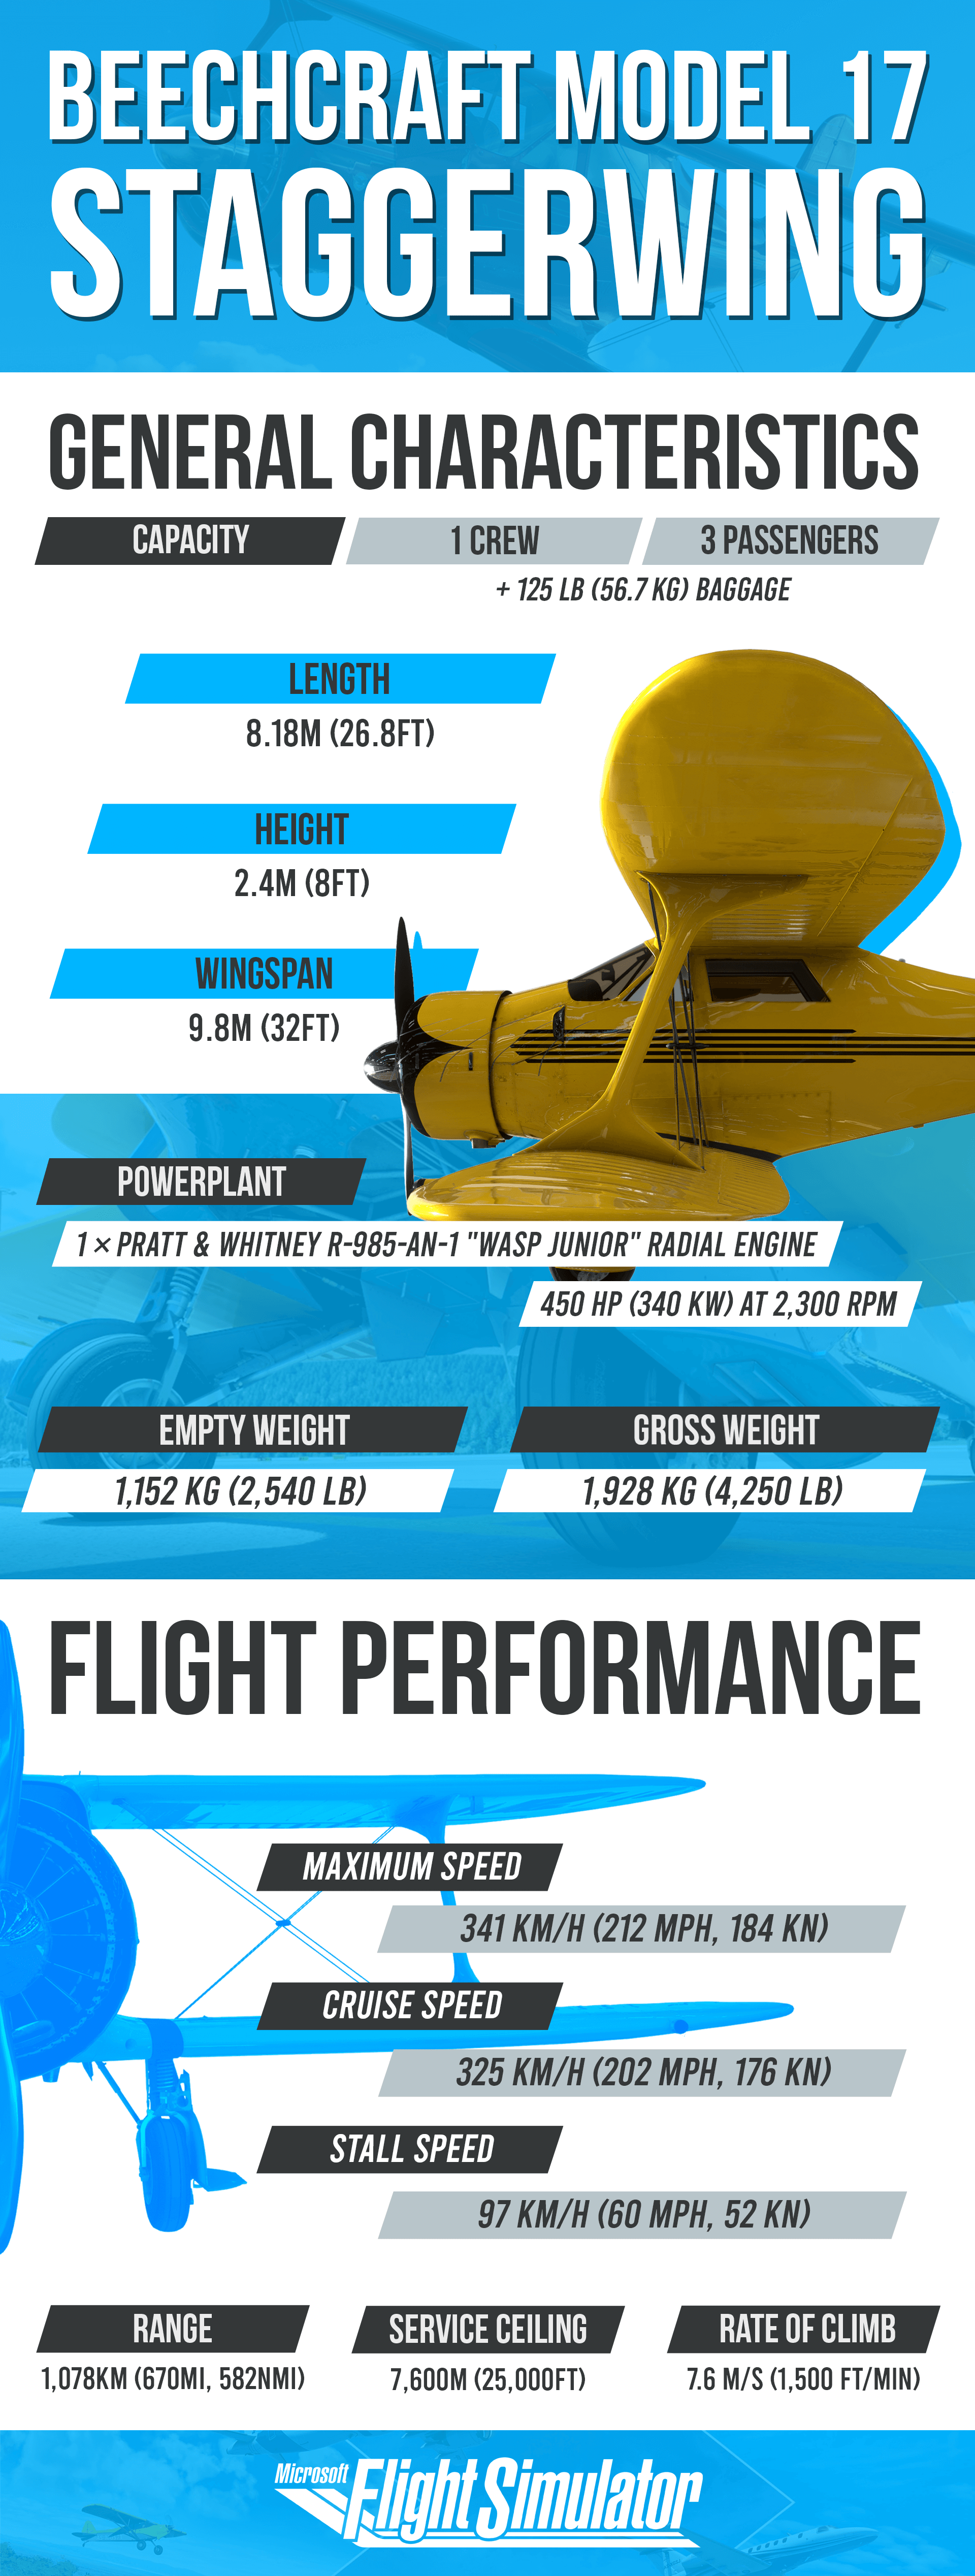 An infographic showing the flight performance of the Beechcraft Staggerwing